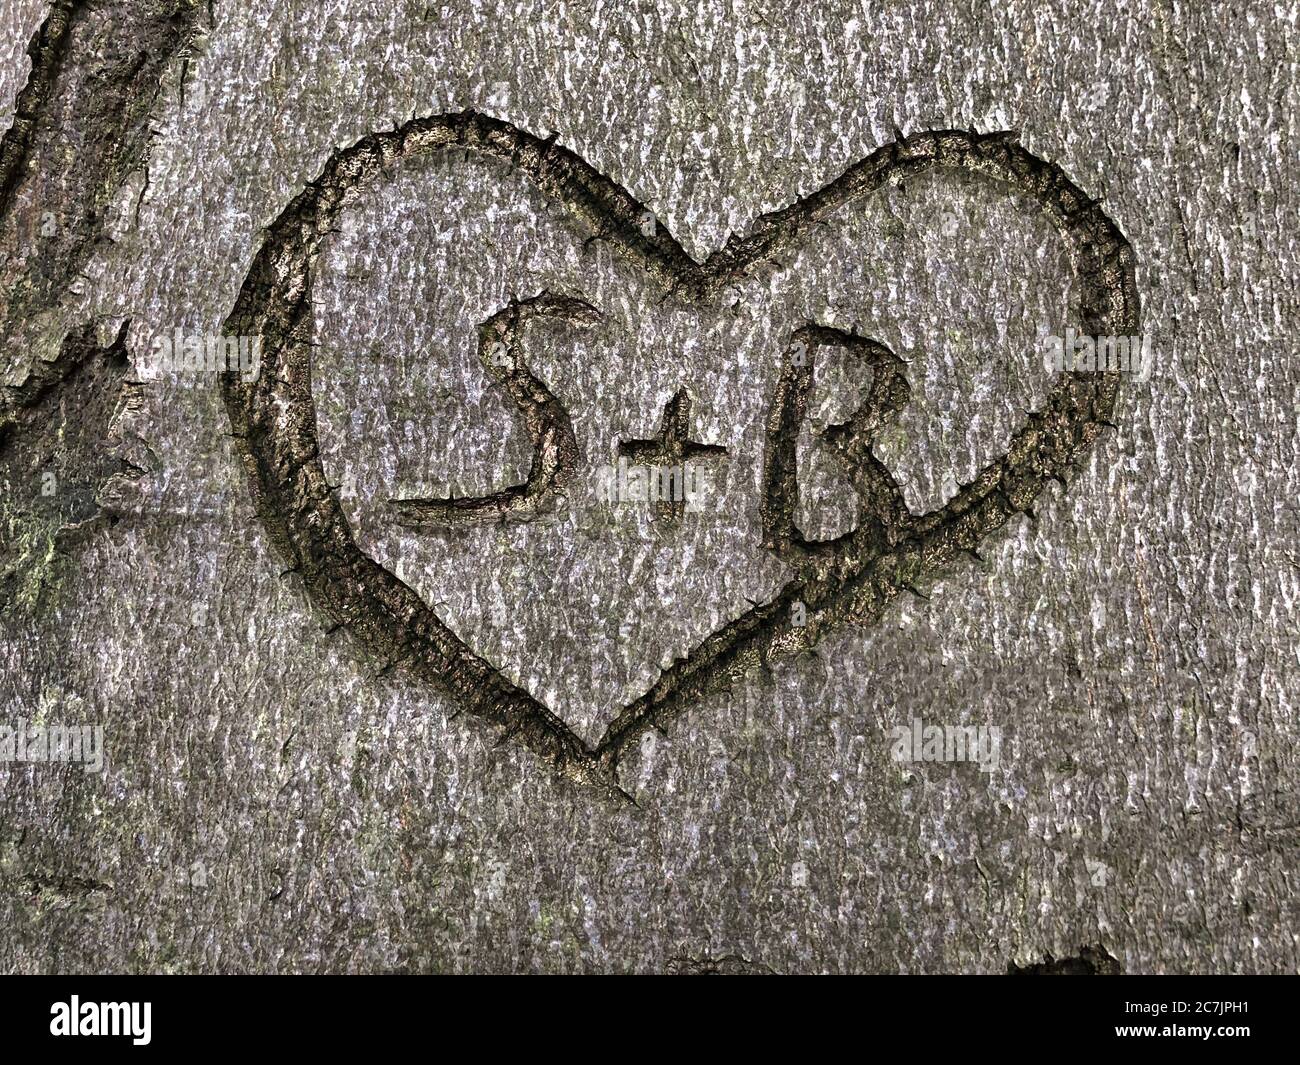 High angle shot of a heart symbol carved on a tree Stock Photo